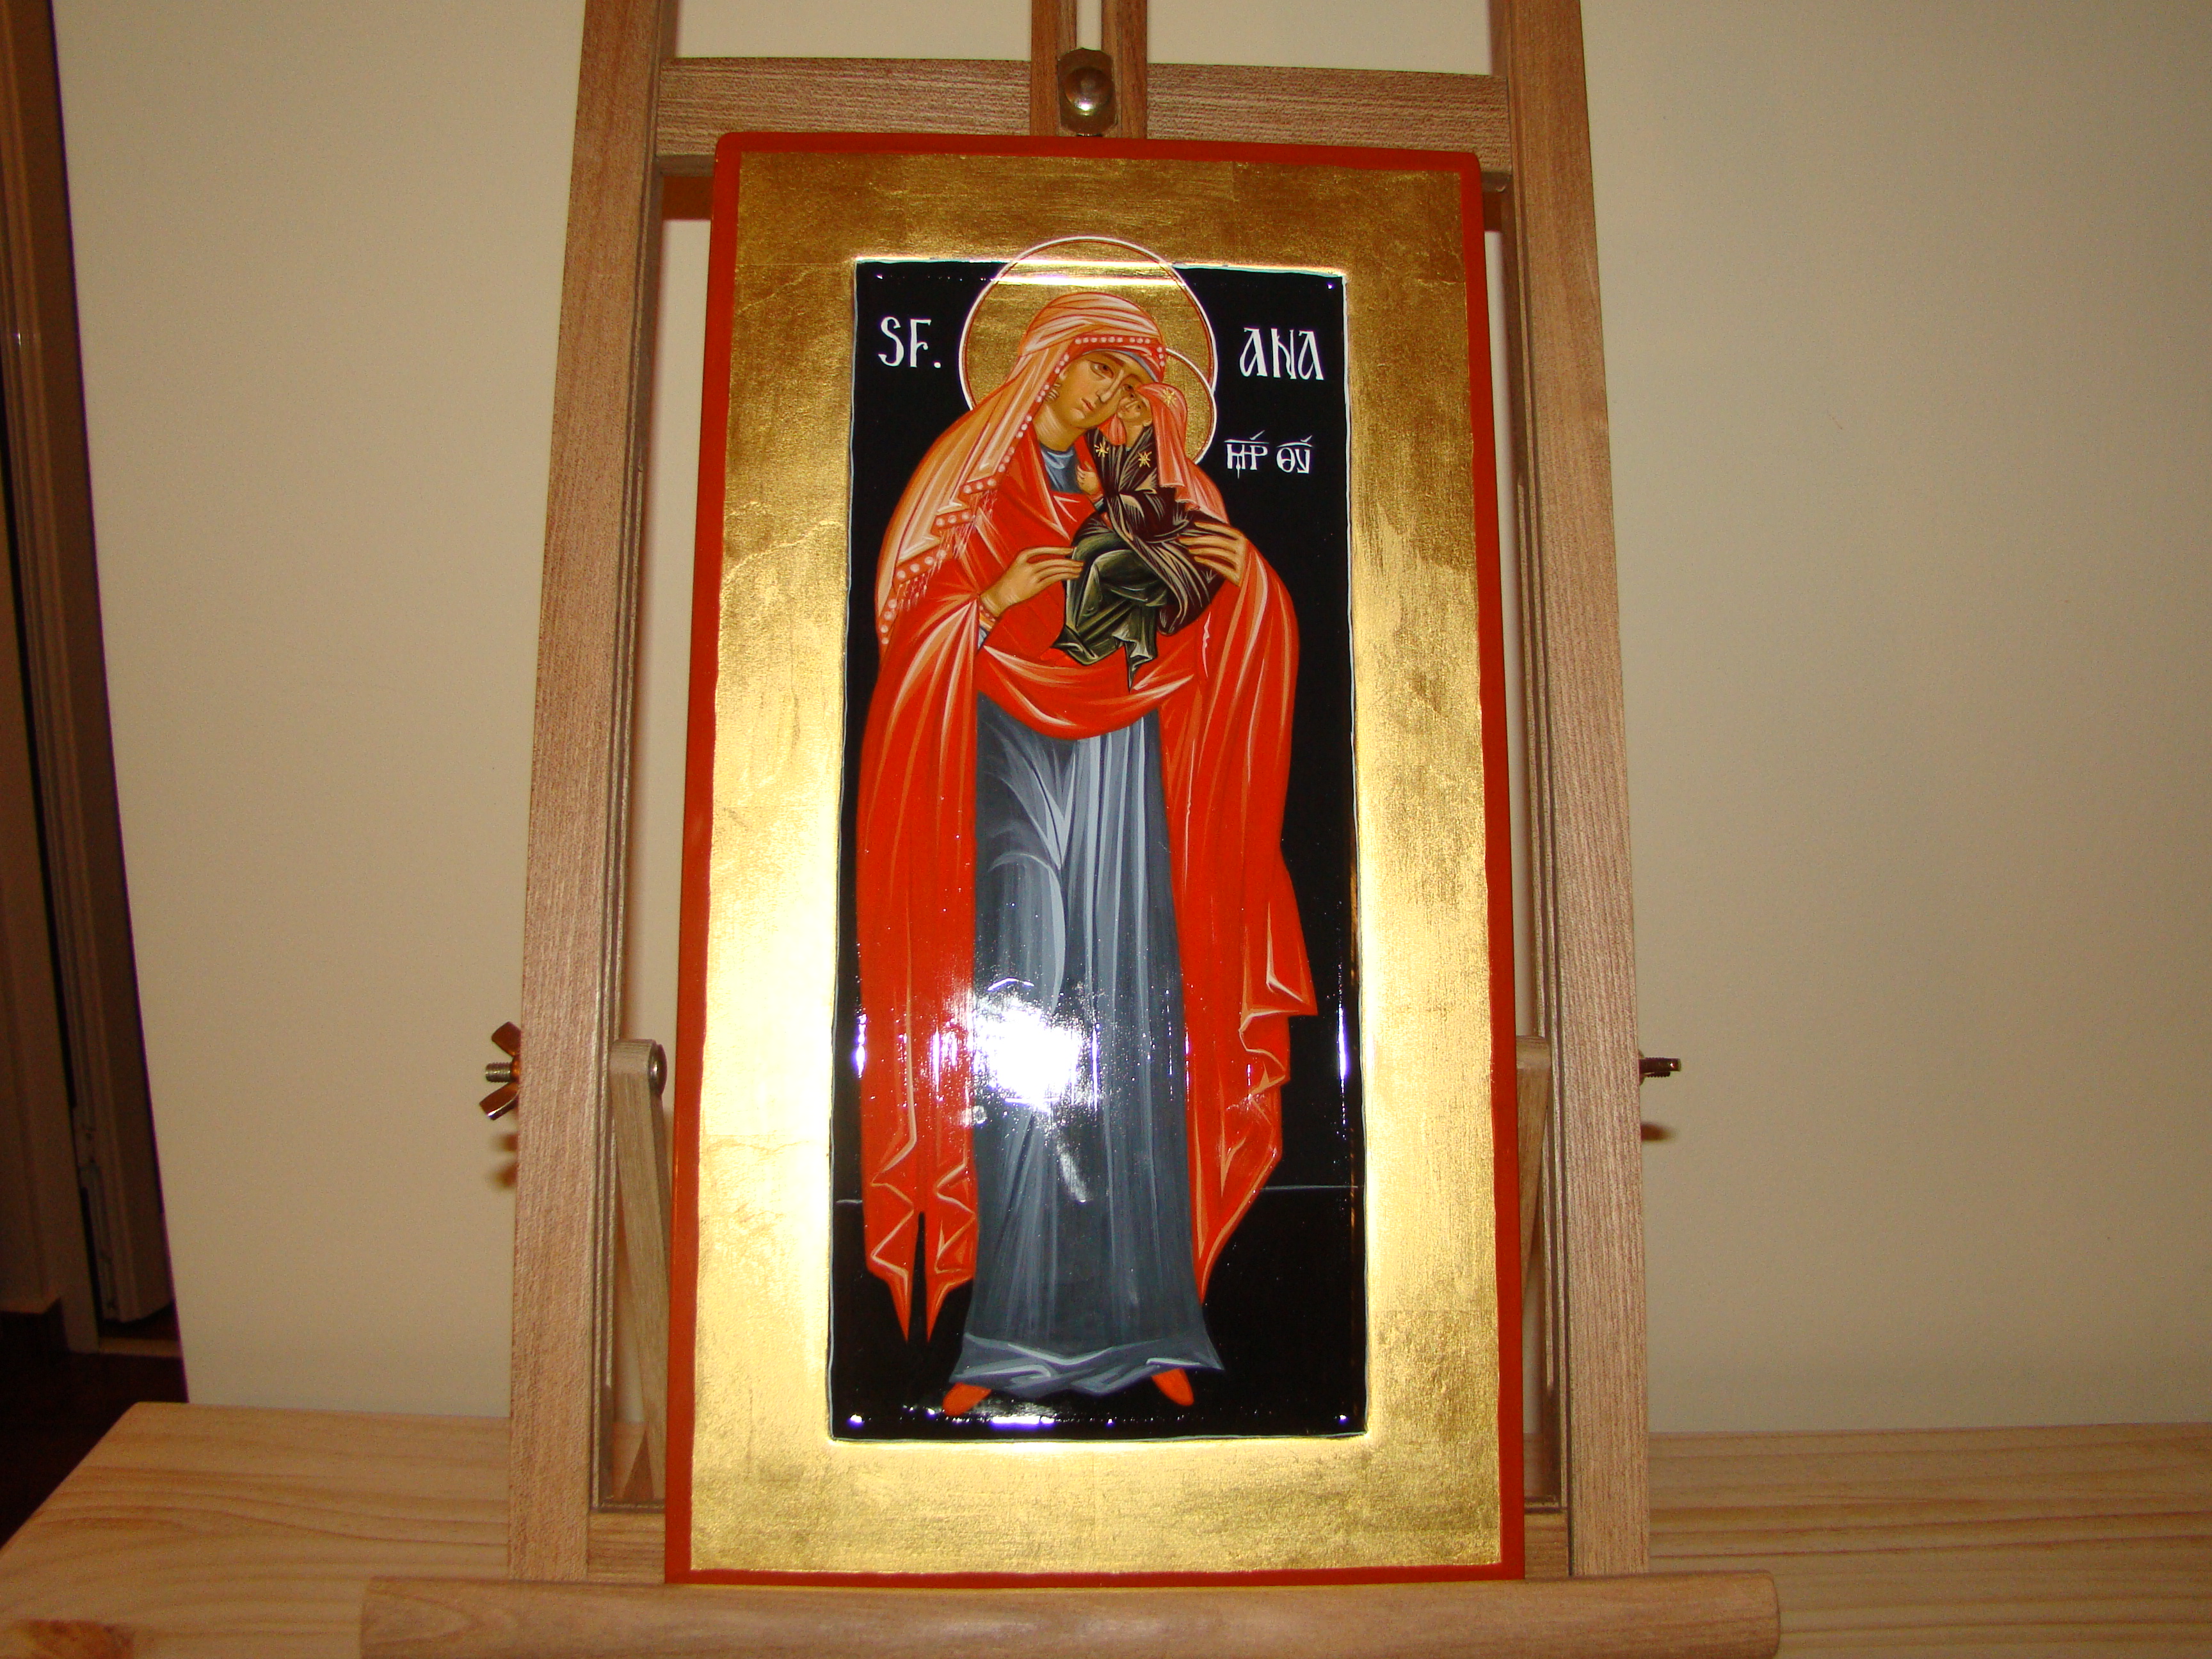 Saint Anna and Mother of God